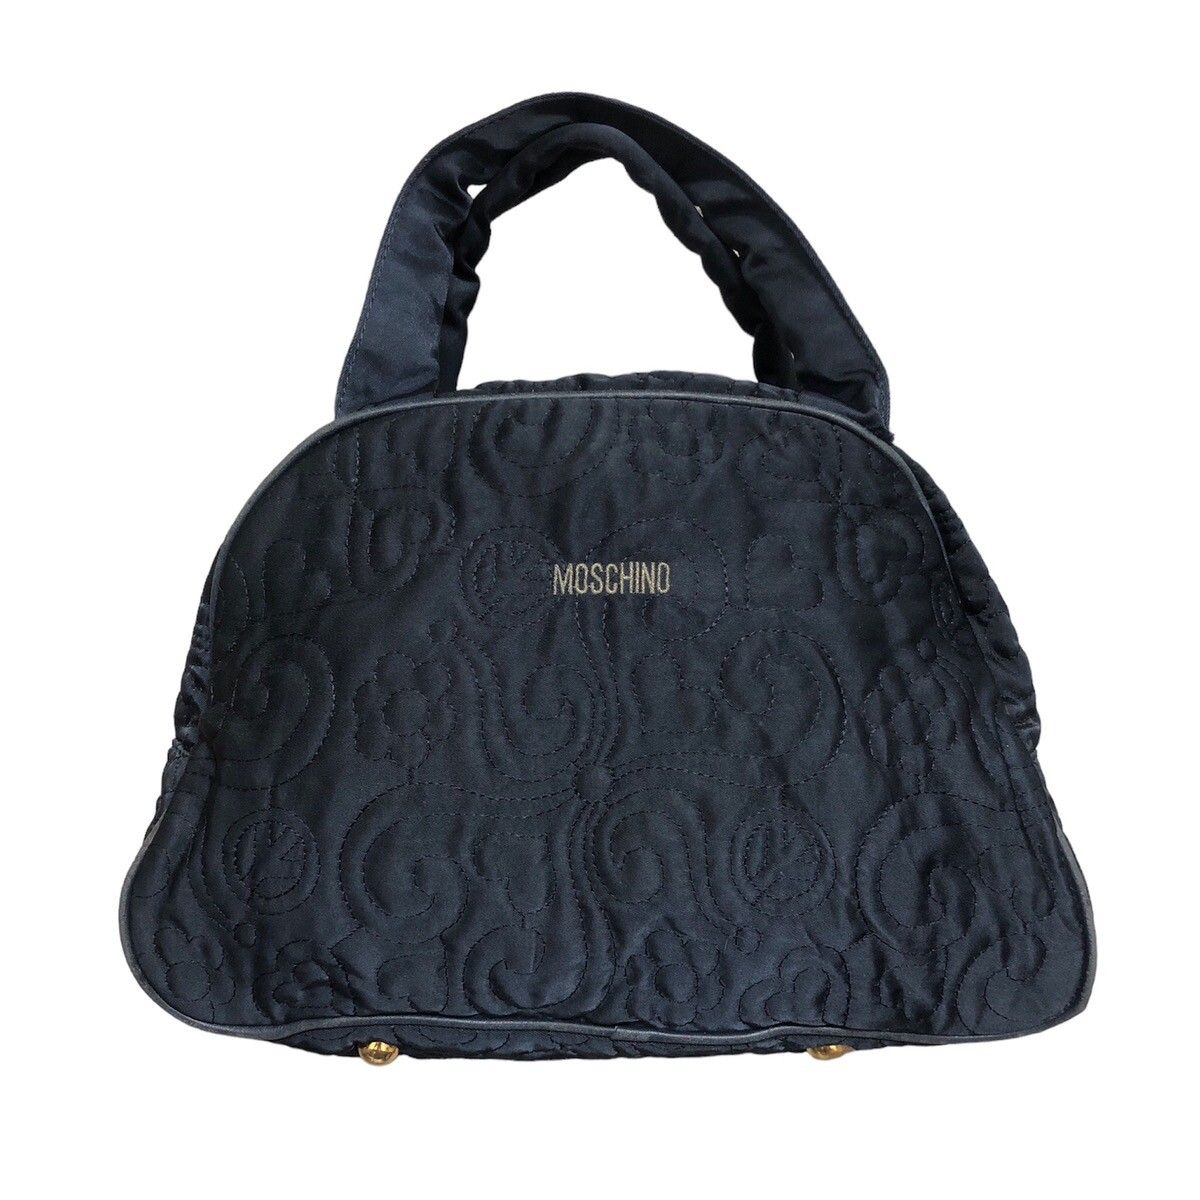 Moschino Satin Embroidered Tote Bag - 1